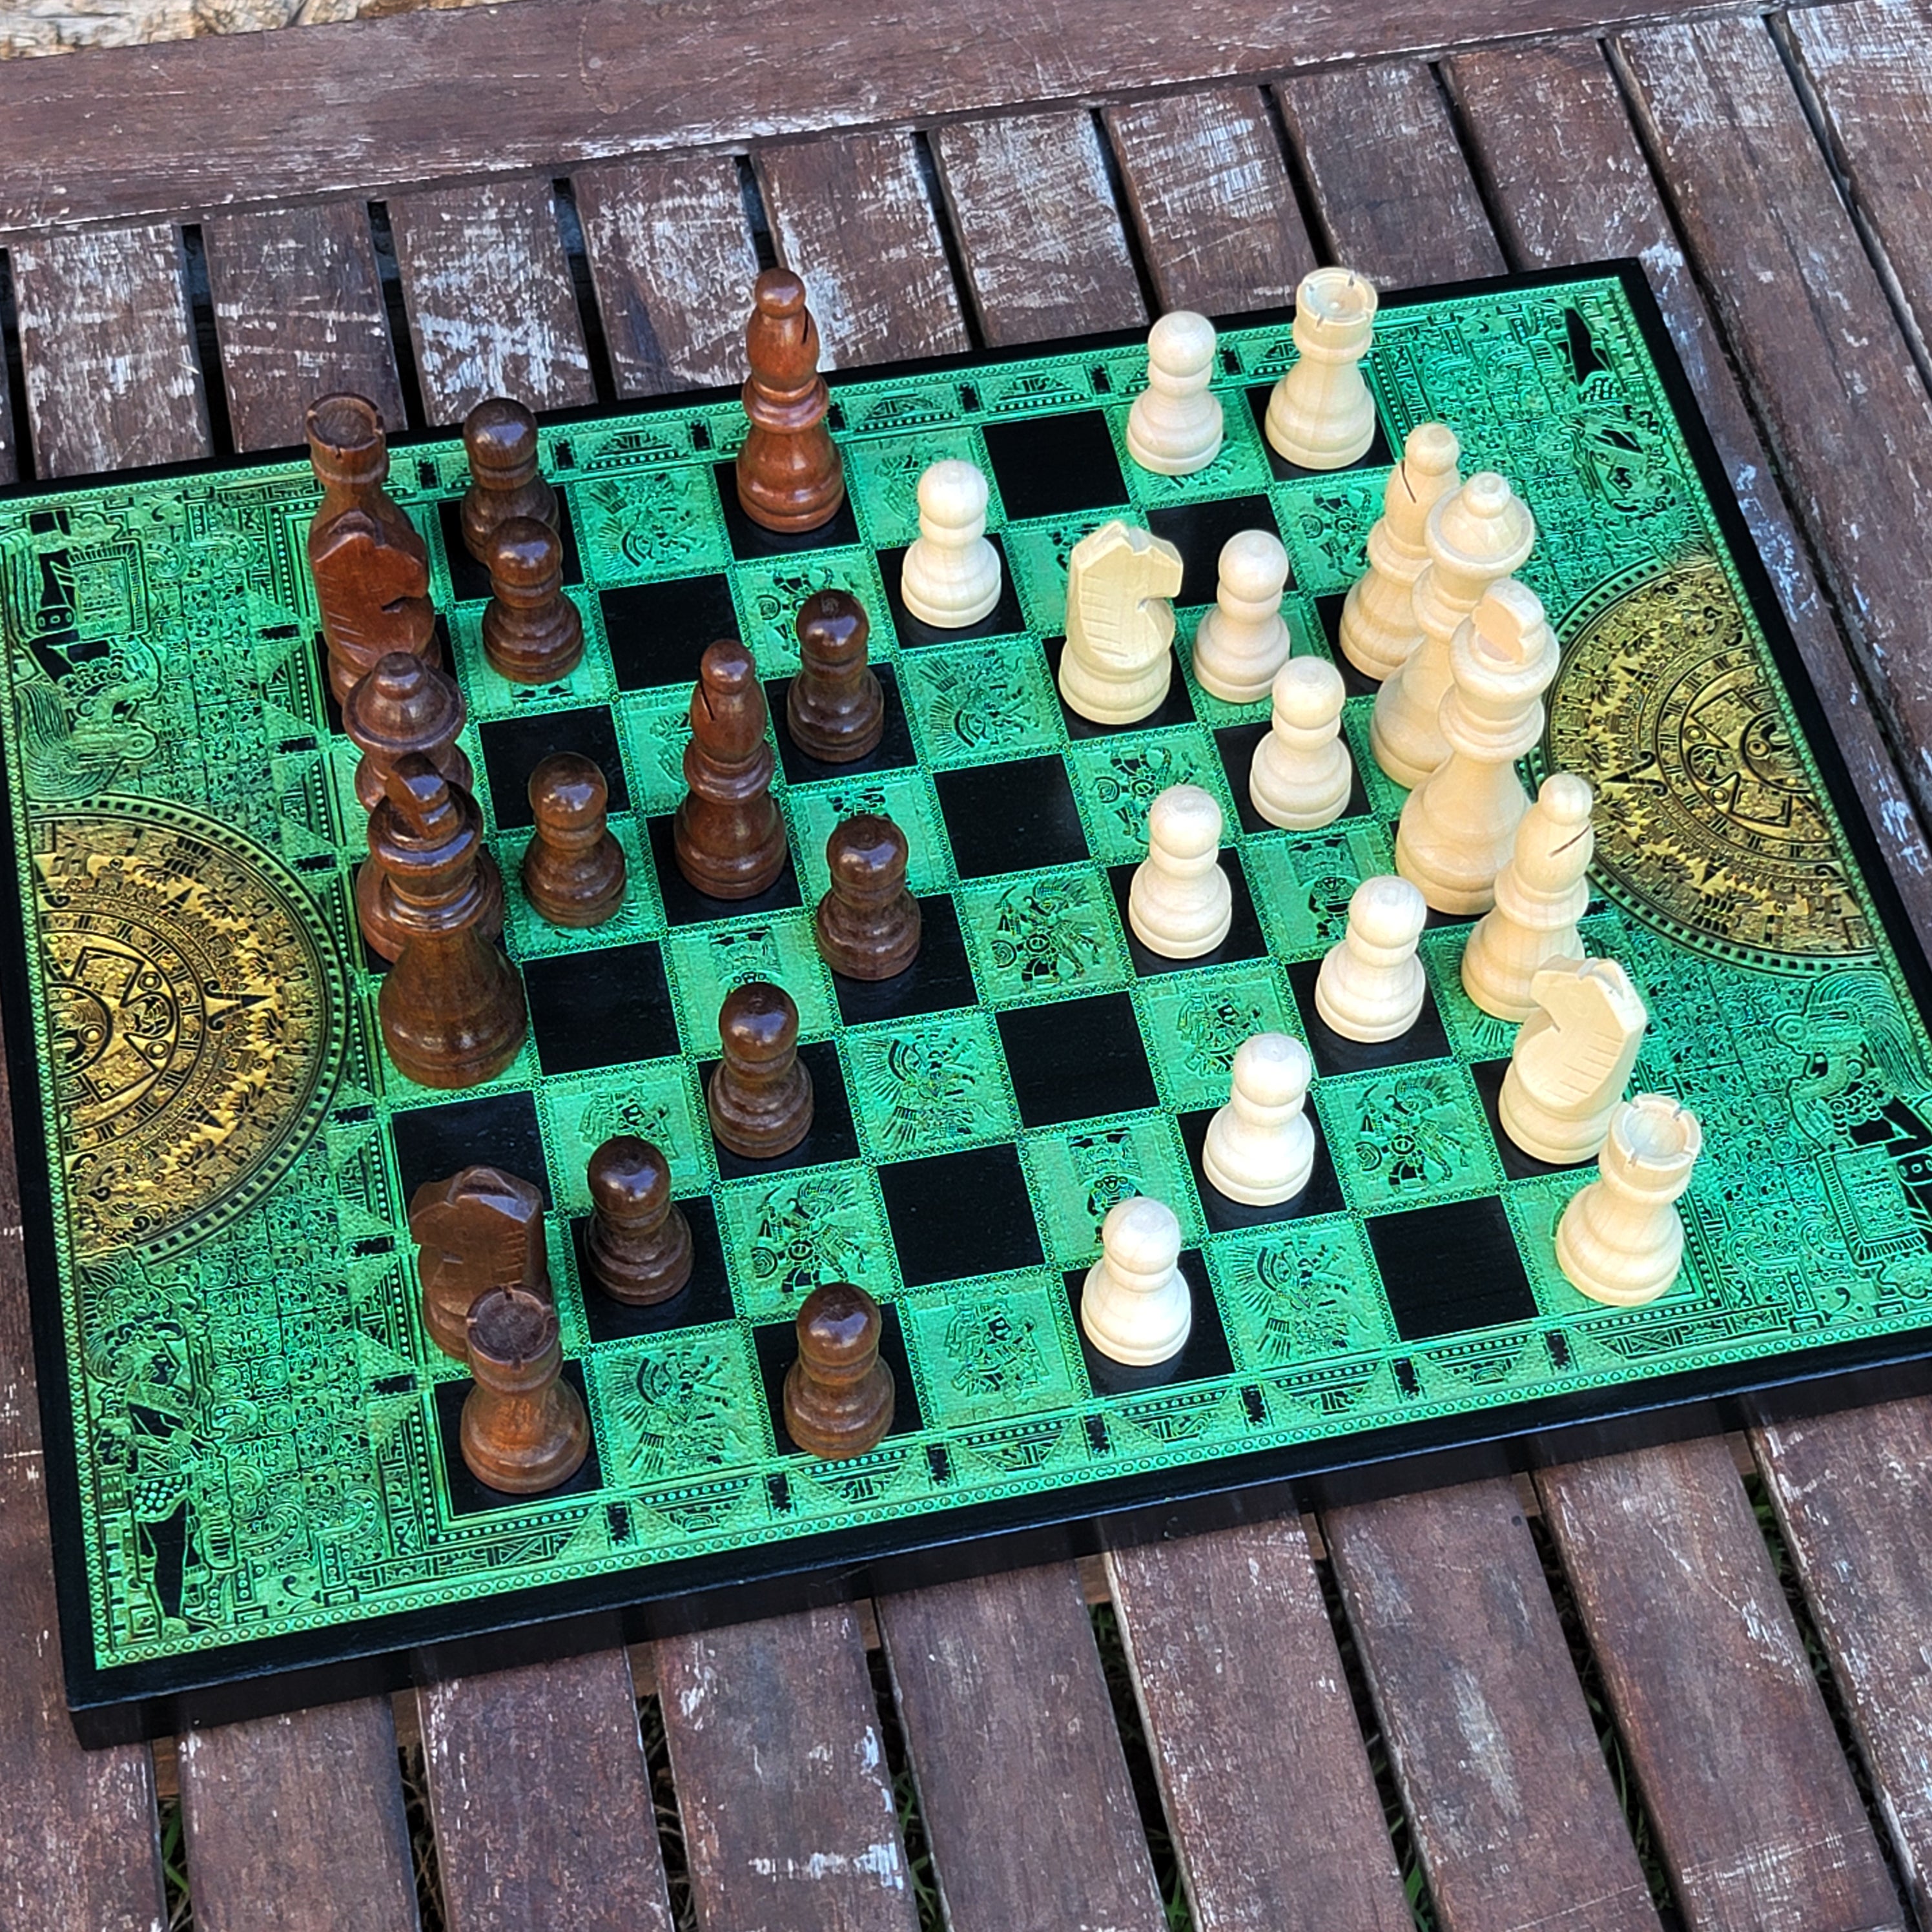 Aztec Chess & Checkers Board Game Set Black & Green - A3 Size -1.25" / 32 mm Square